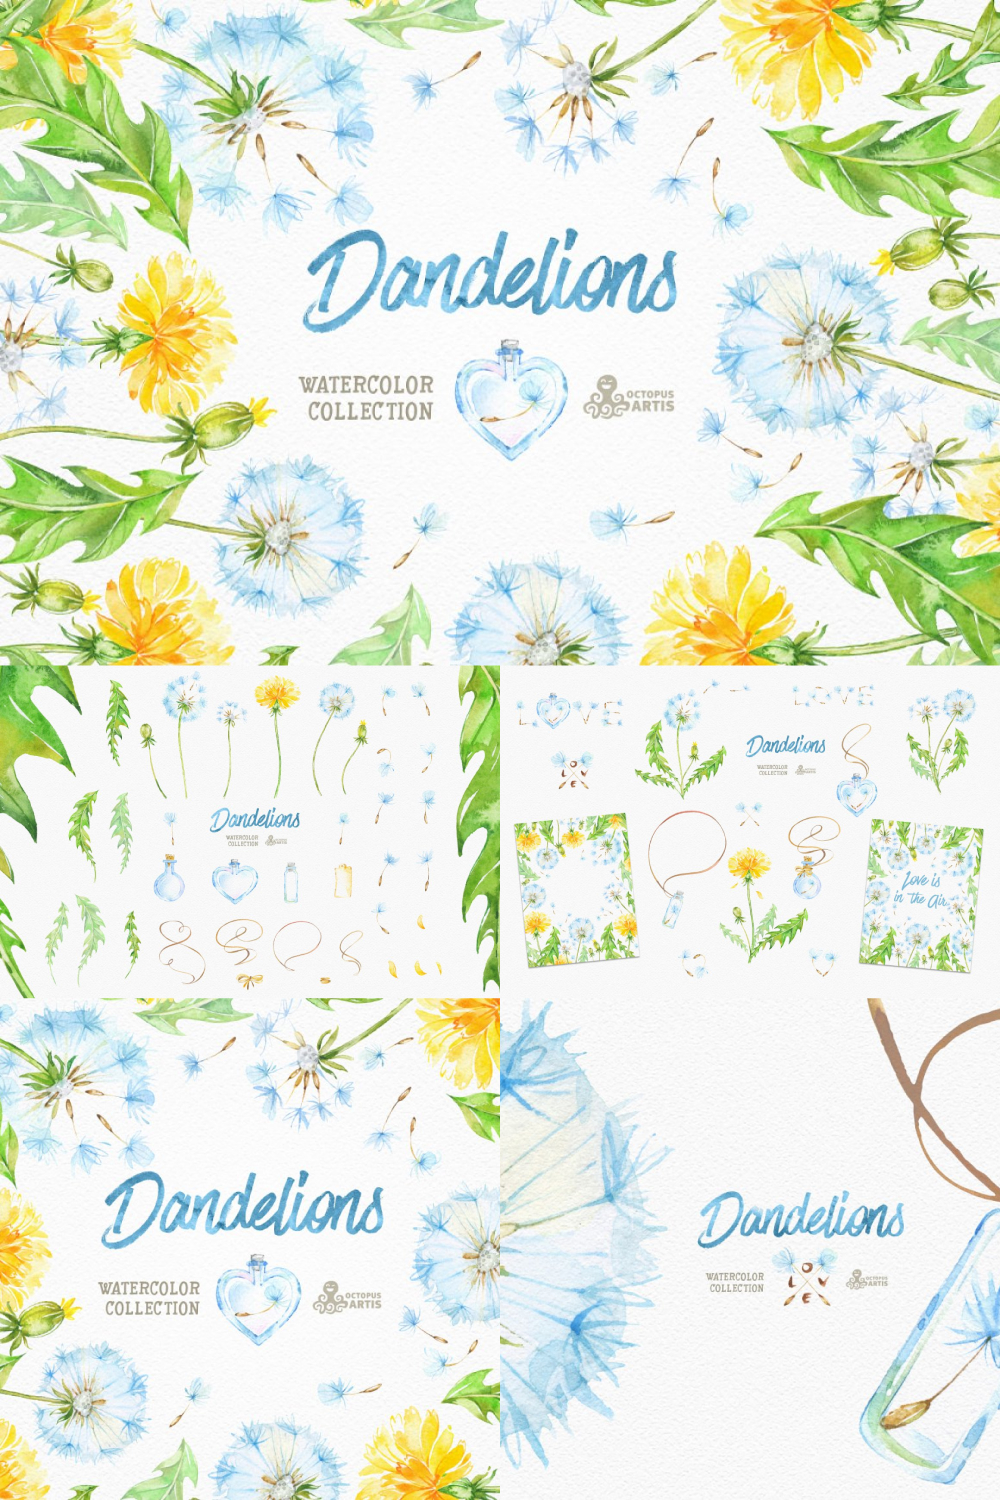 Dandelions. floral collection of pinterest. 1000 1500